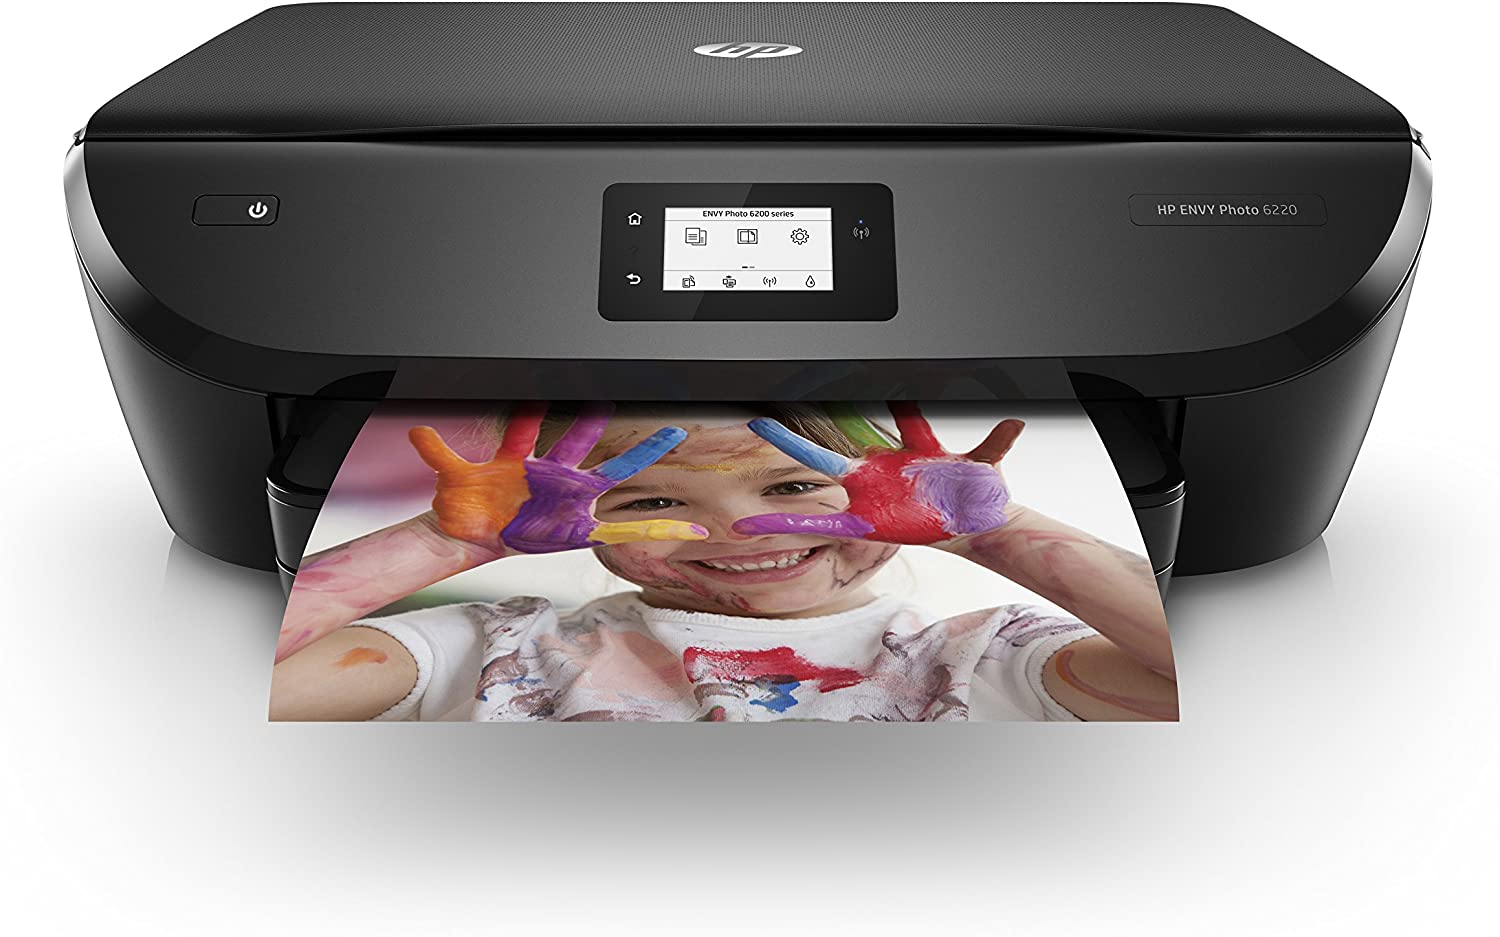  HP Envy Photo 6220 All-in-One Printer with 12 Months of Instant Ink Included, Black uk reviews